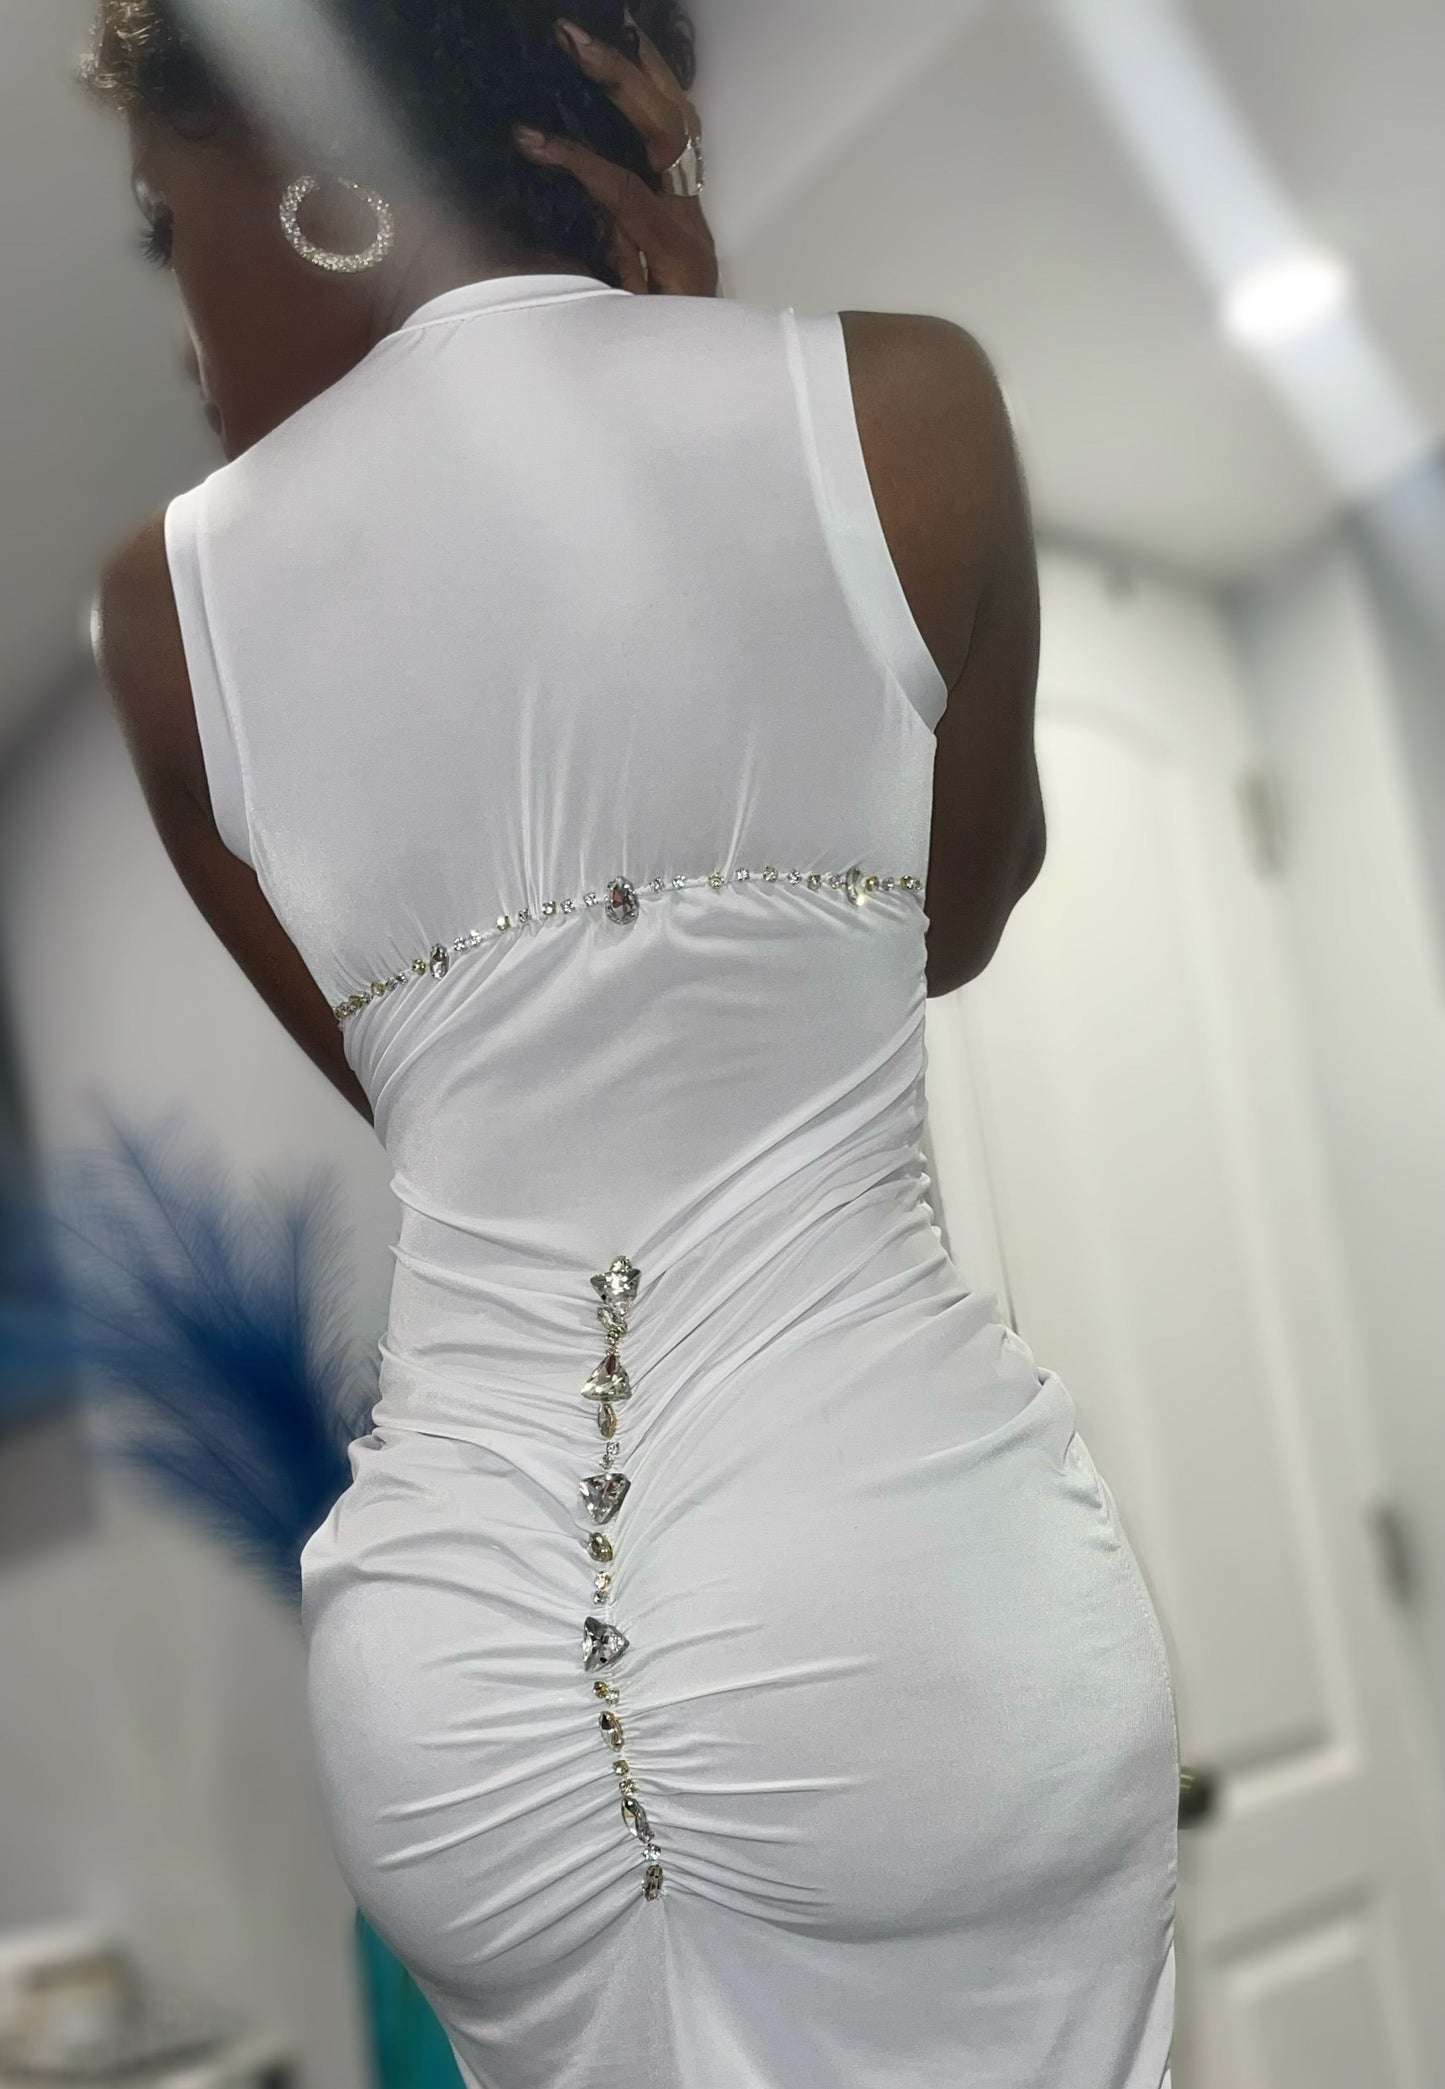 Back view of a sleeve less tank style white dress. Dress is both cool and elevated with both small and large rhinestones placed across the back shoulder length. The rhinestones are then placed down the mid center back of the dress. The garment will stretchy and form fitting to the body.